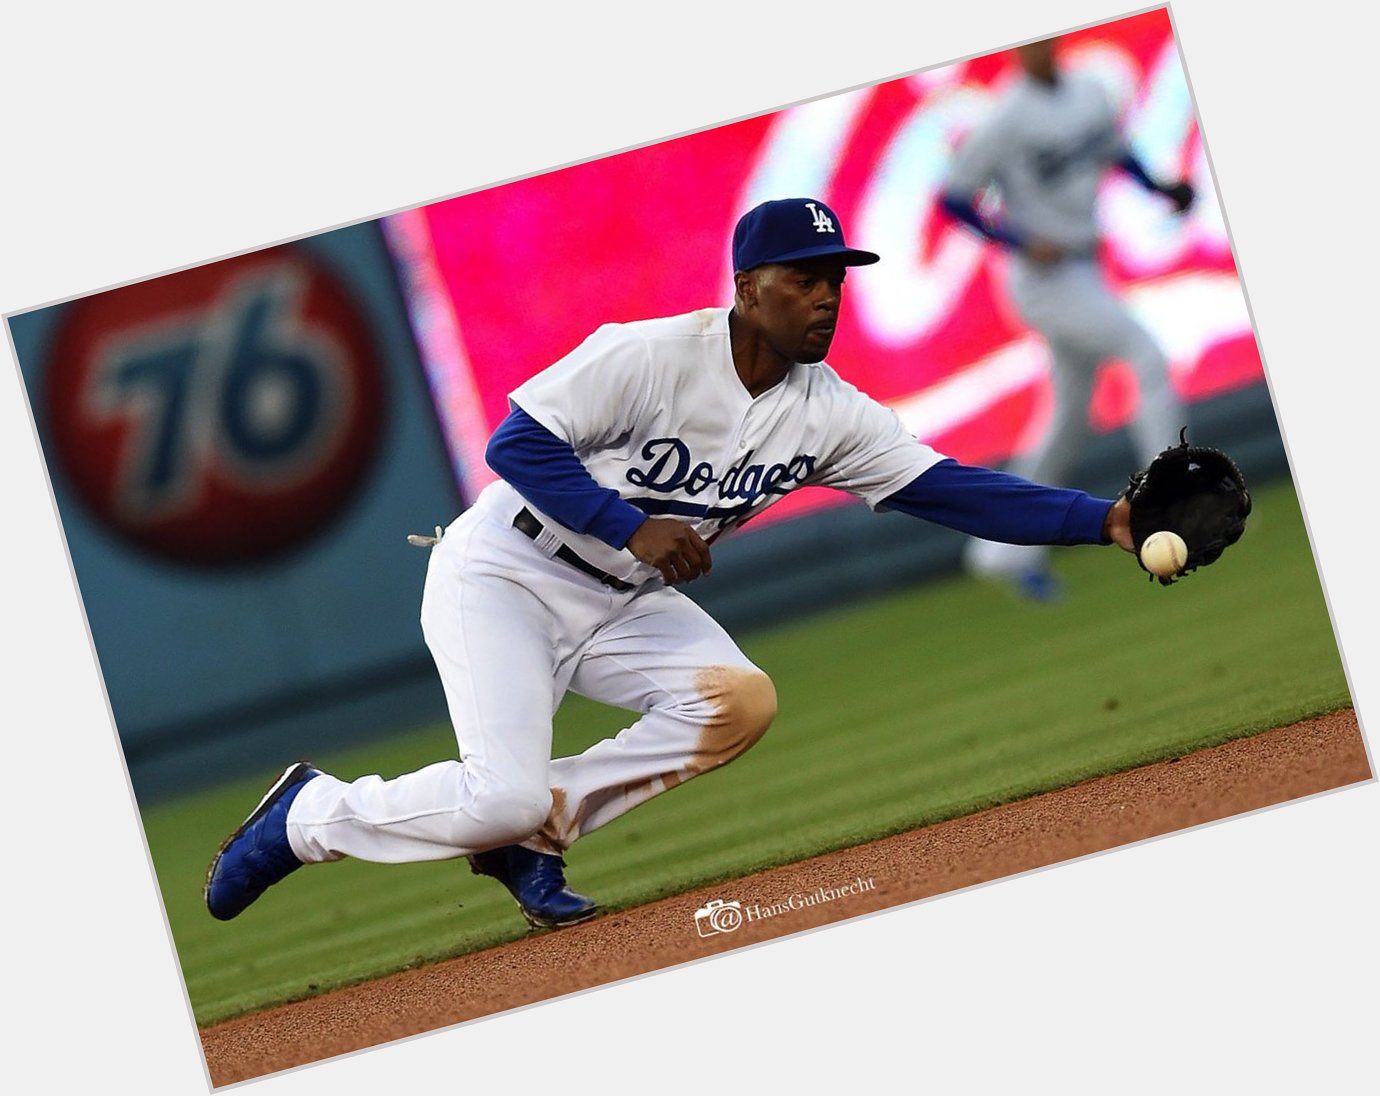 We would like to wish a happy 37th birthday to three-time all-star Jimmy Rollins!  